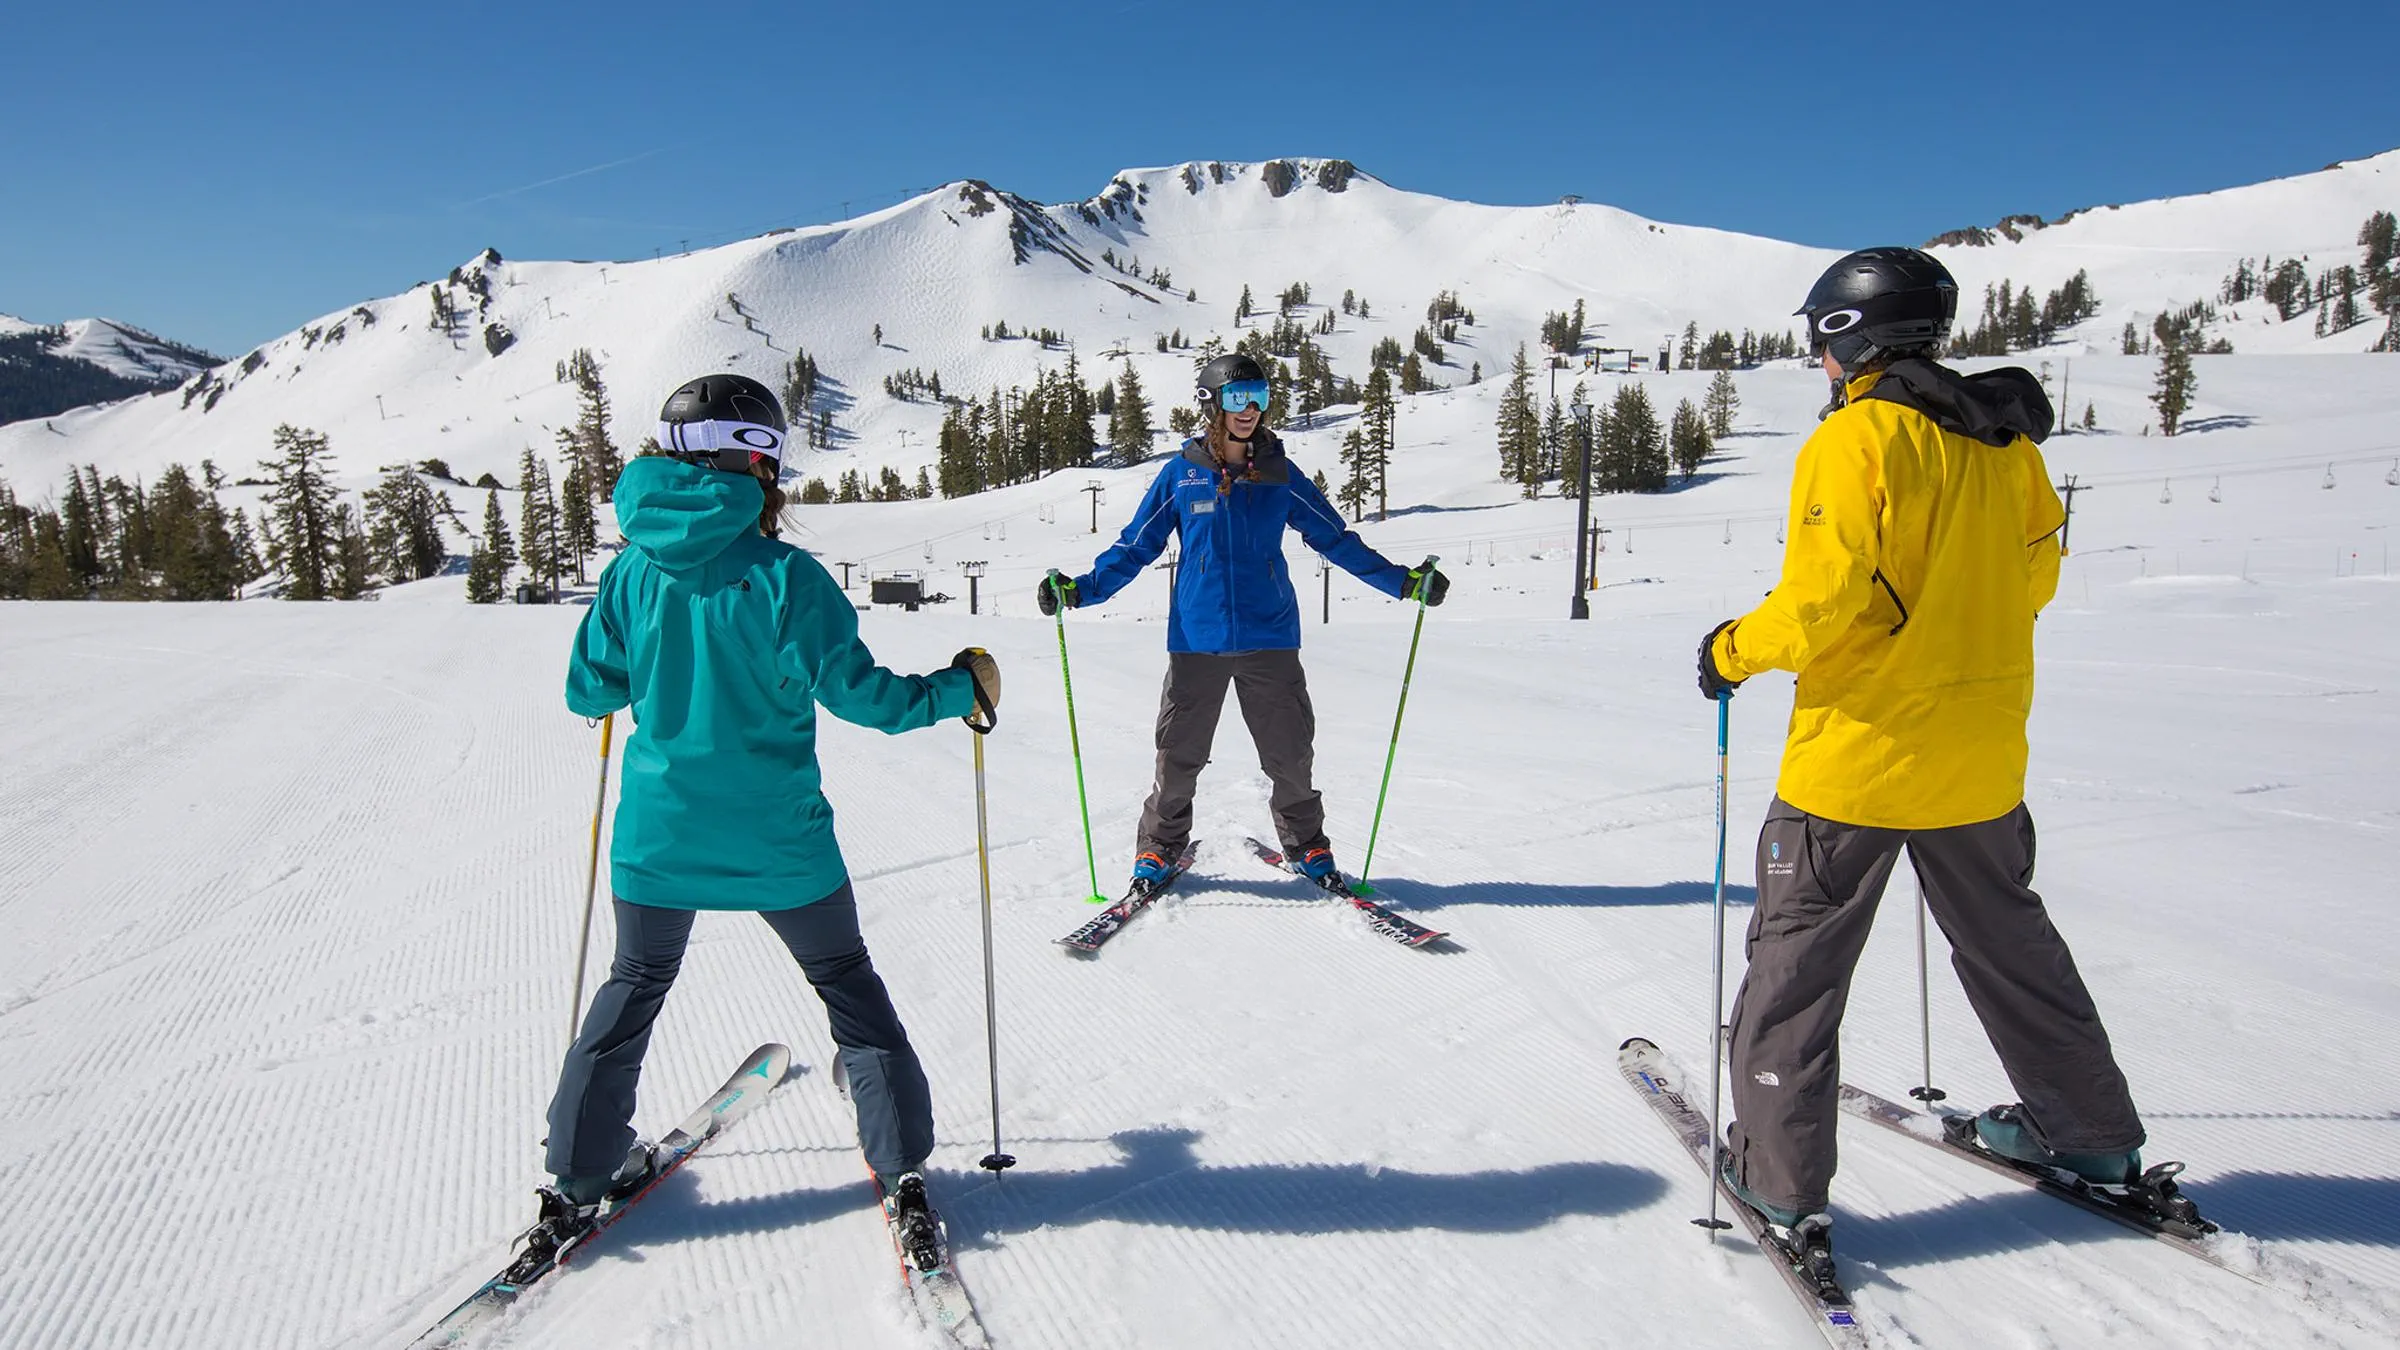 A group interaction on snow during Beginner Ski School photo shoot at Squaw Valley